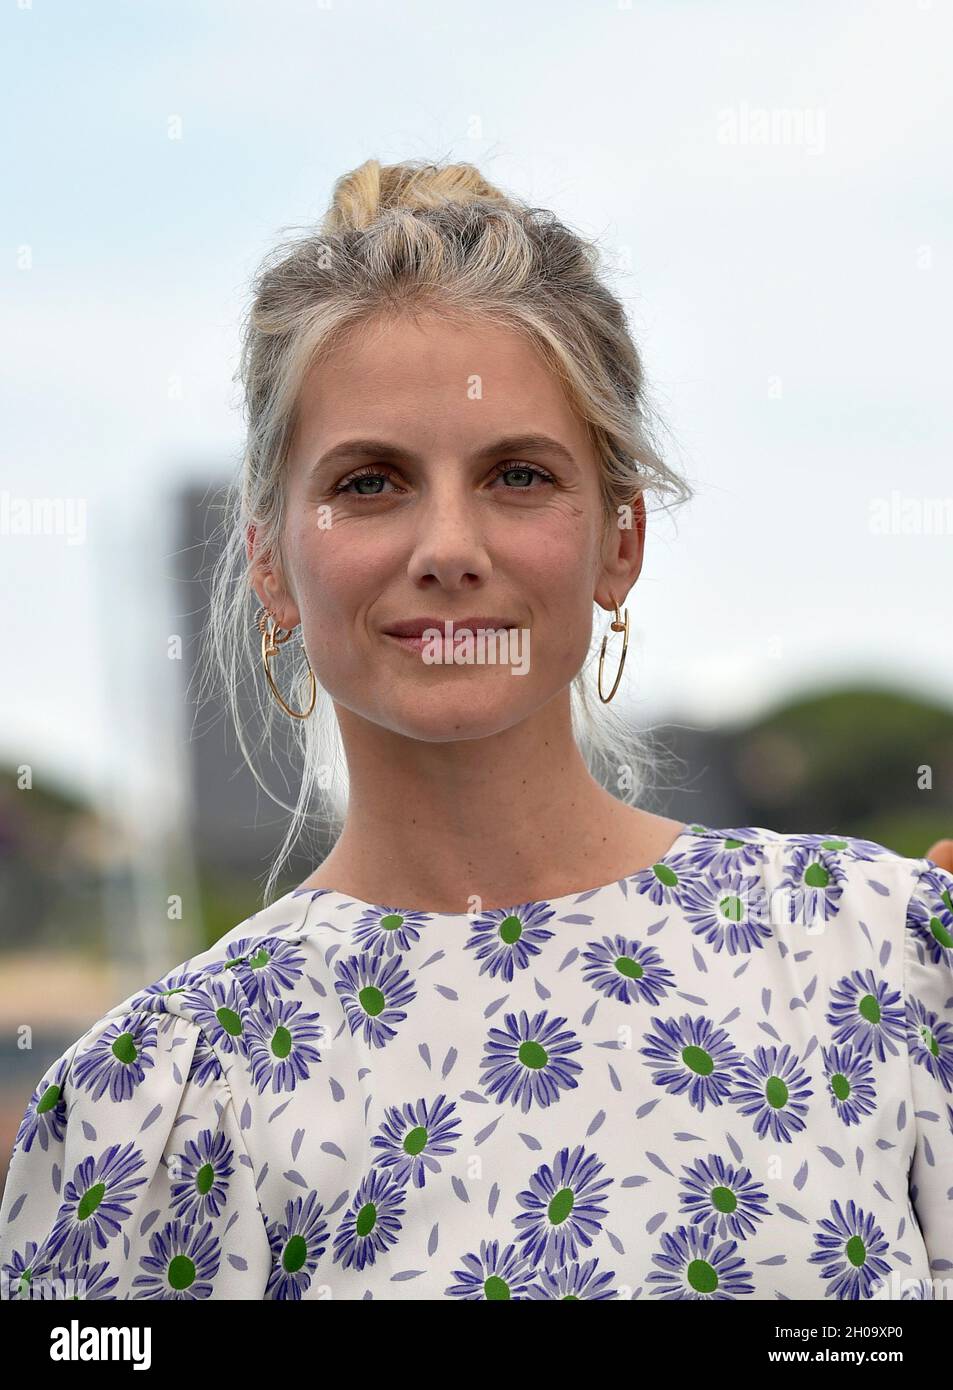 74th edition of the Cannes Film Festival: Melanie Laurent posing during a photocall with the official jury members of the Cannes Film Festival, on Jul Stock Photo